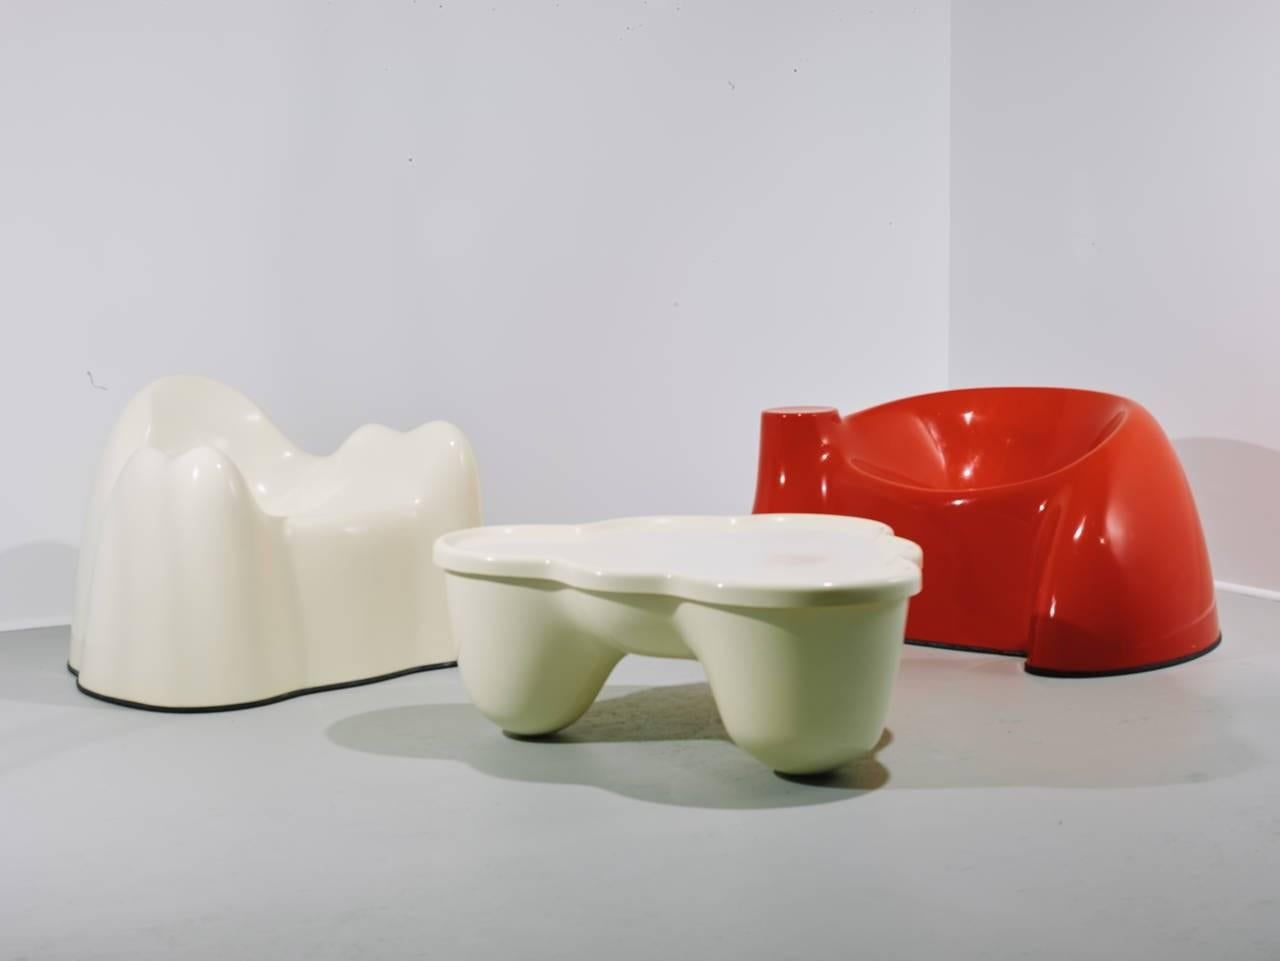 Wendell Castle. Molar Group armchair.

USA, circa 1969.
Gel-coated fiberglass.
Measures: 37.5 W x 32 D x 25.5 H inches.

An approximate 100 examples of the Molar Group chair were made. Piece has been authenticated by Wendell